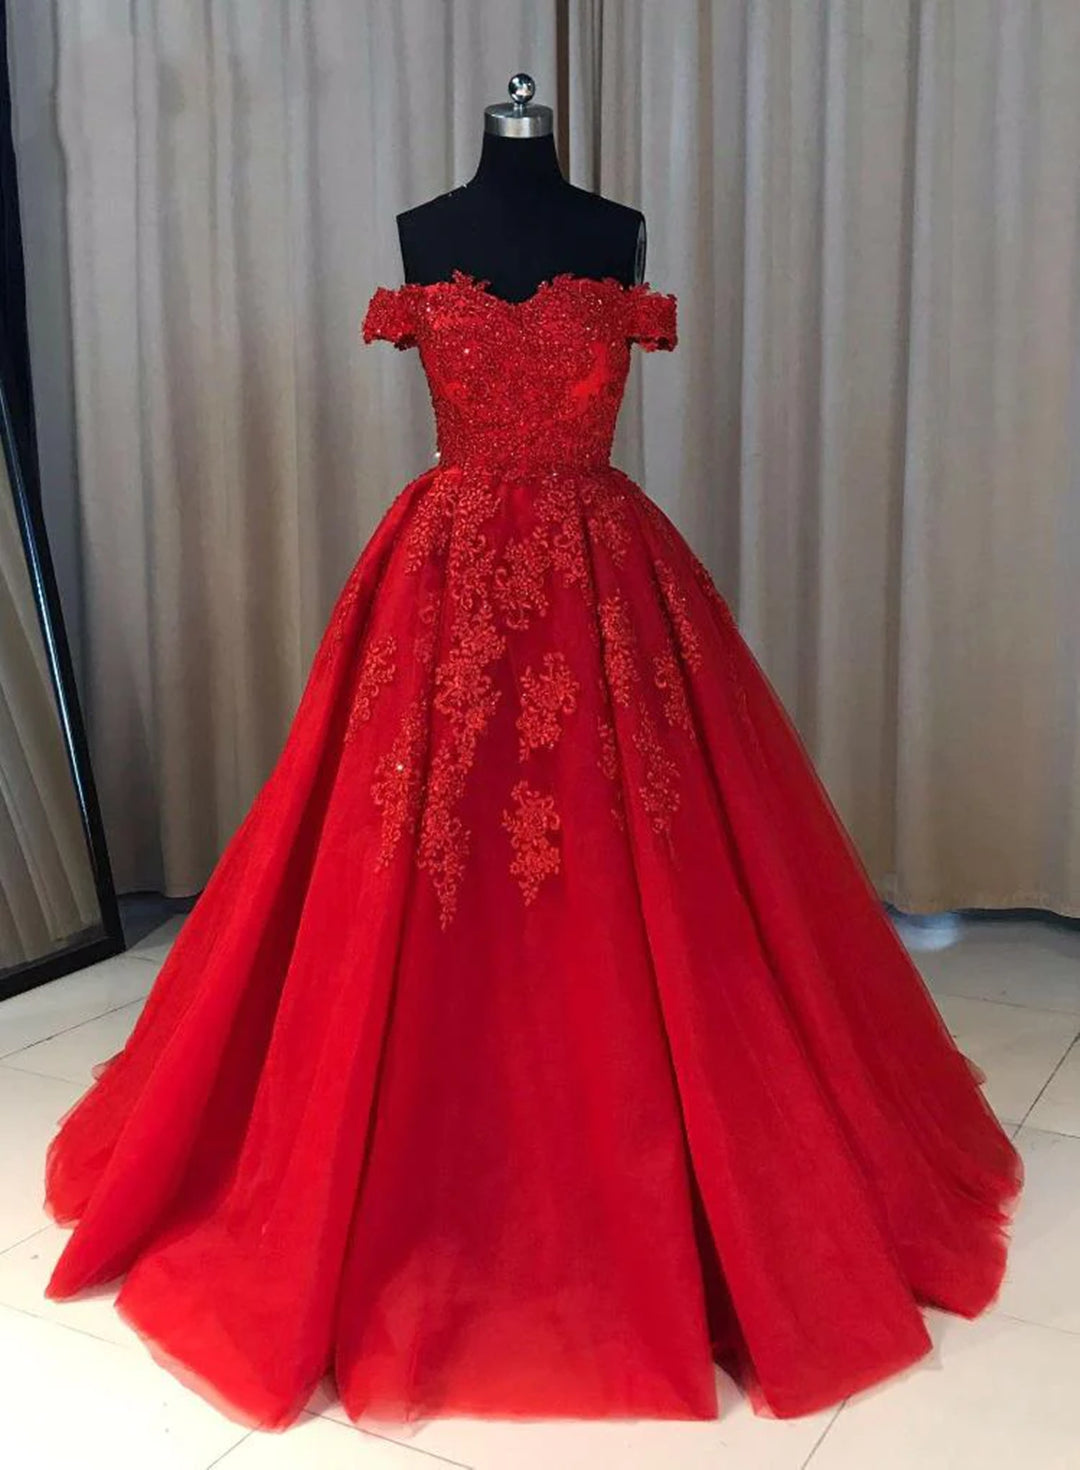 Red Off Shoulder Gorgeous Corset Prom Dress, Lovely Corset Formal Gowns , Party Dresses outfit, Prom Dresses Stores